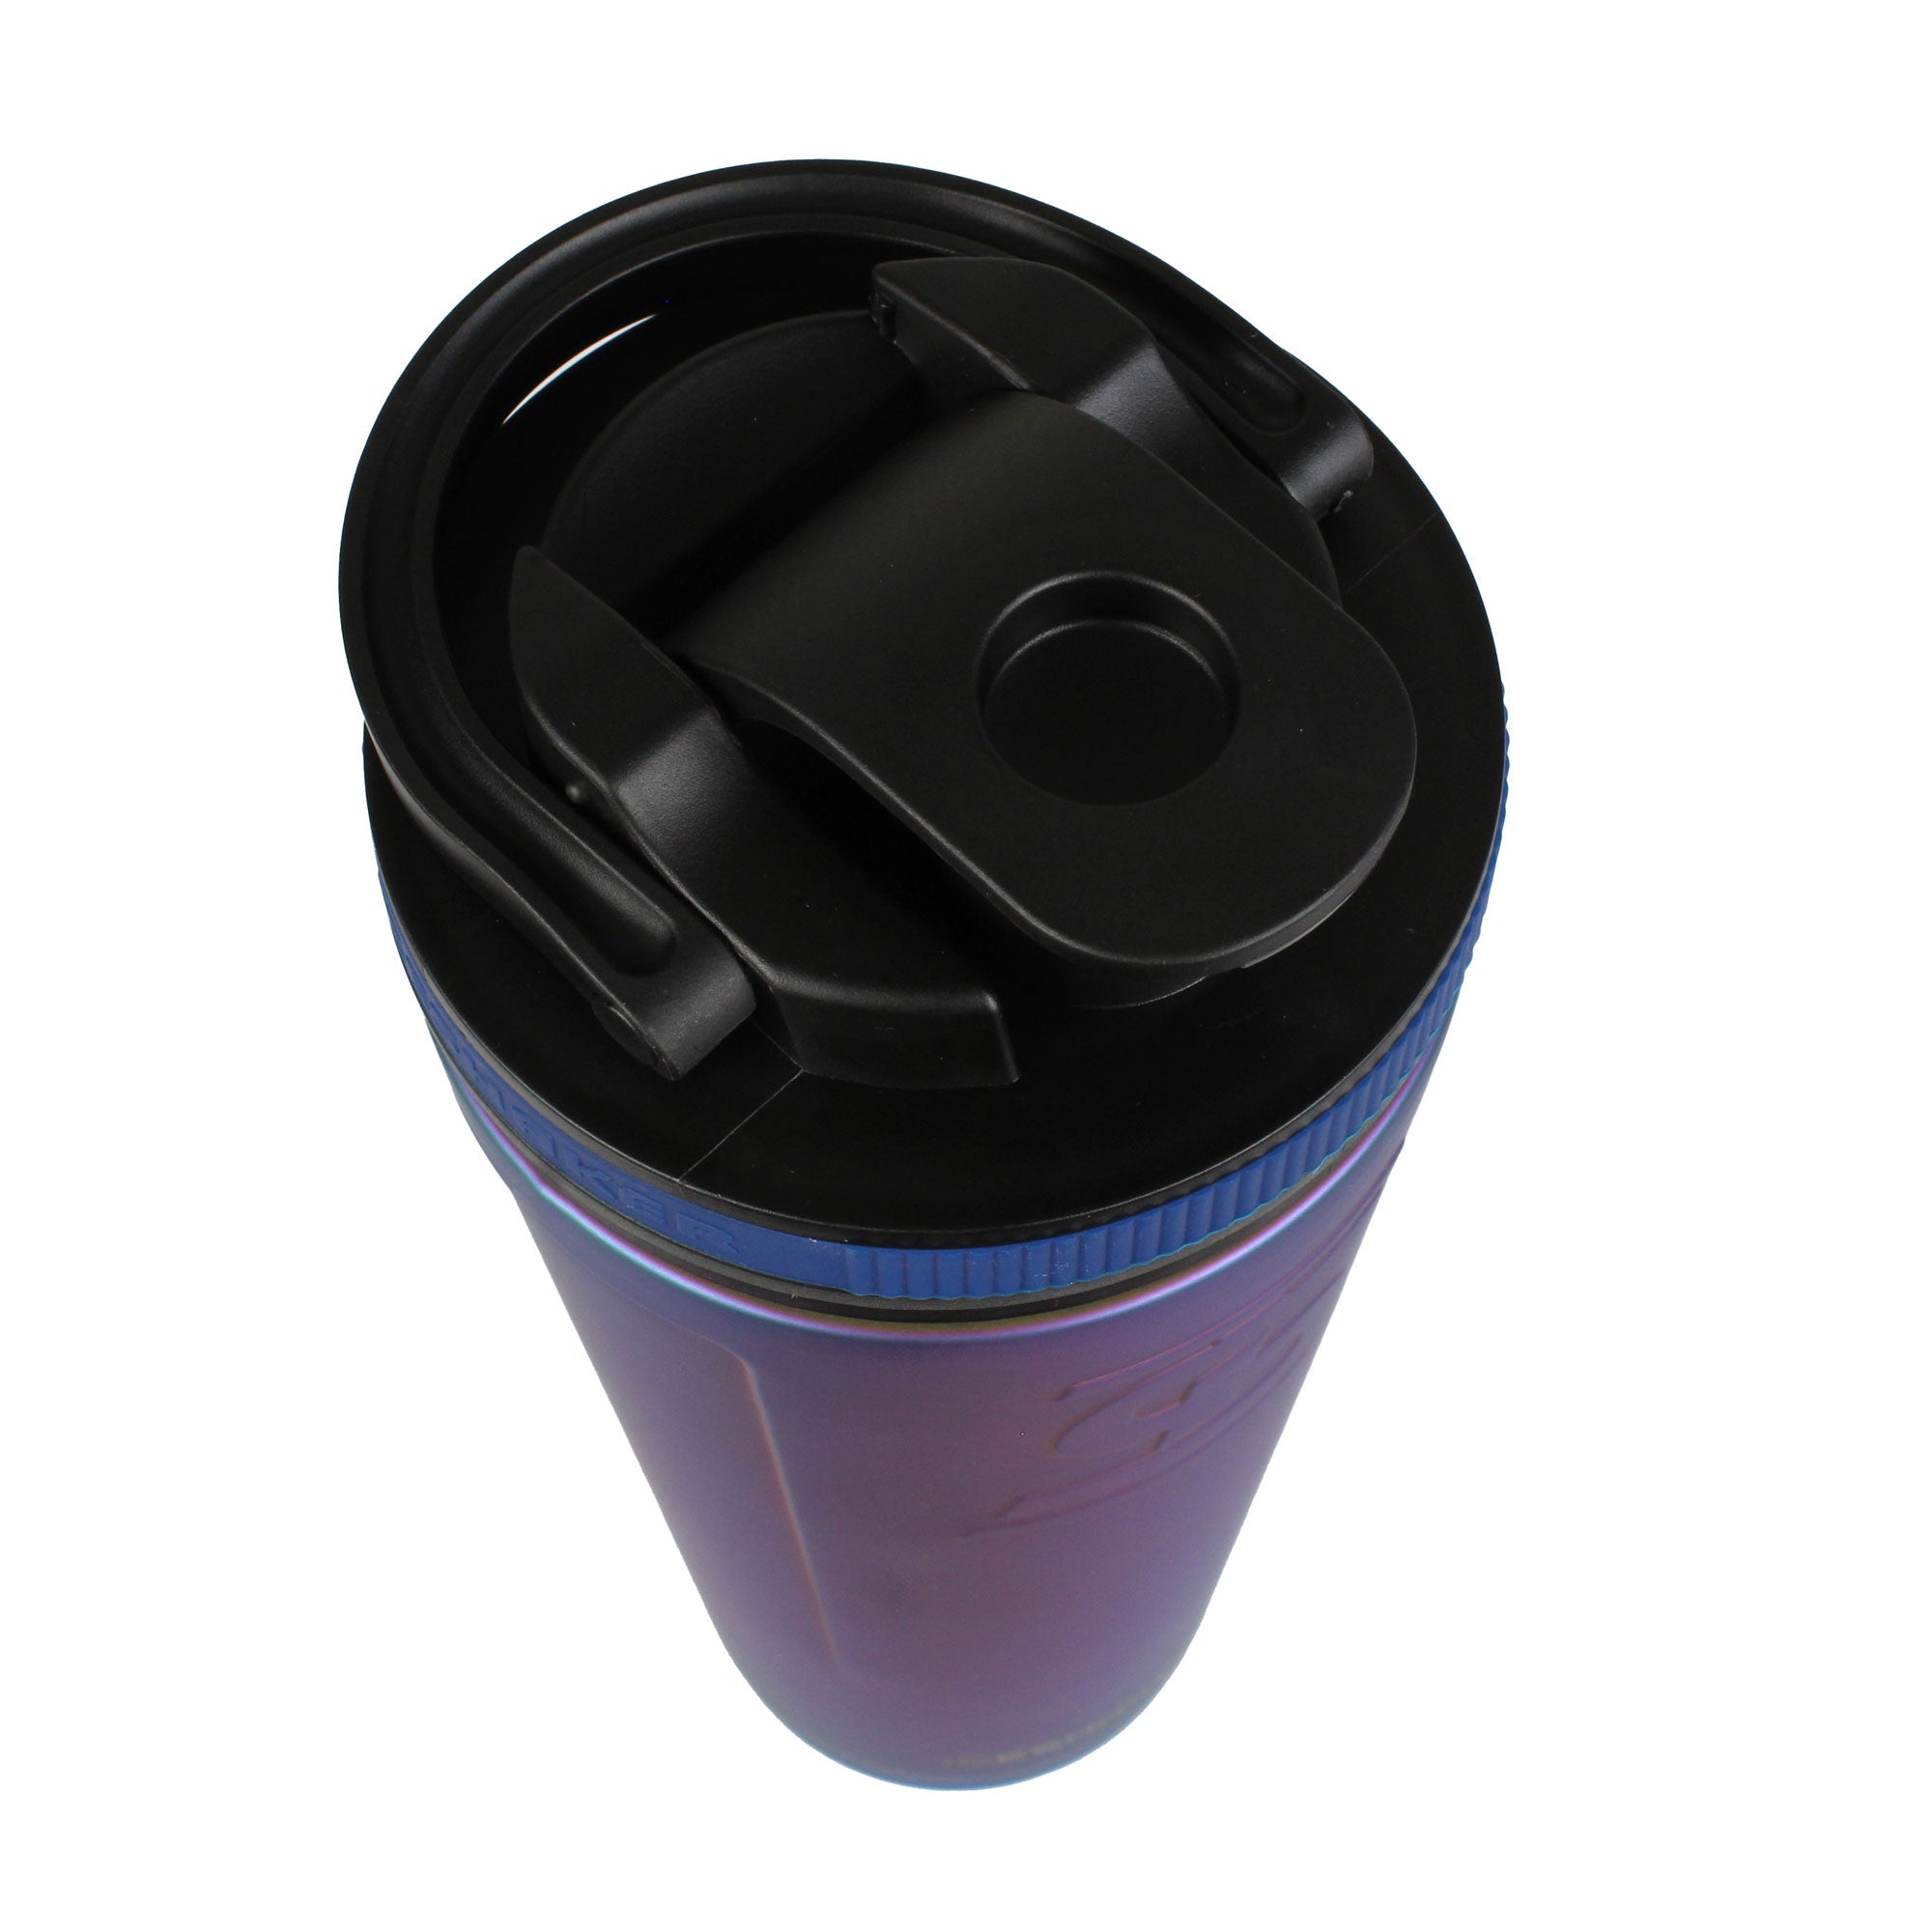 New No Spill Mug Cup Holder for Shaky Hands to Carry Hot Cold Drinks Cup B